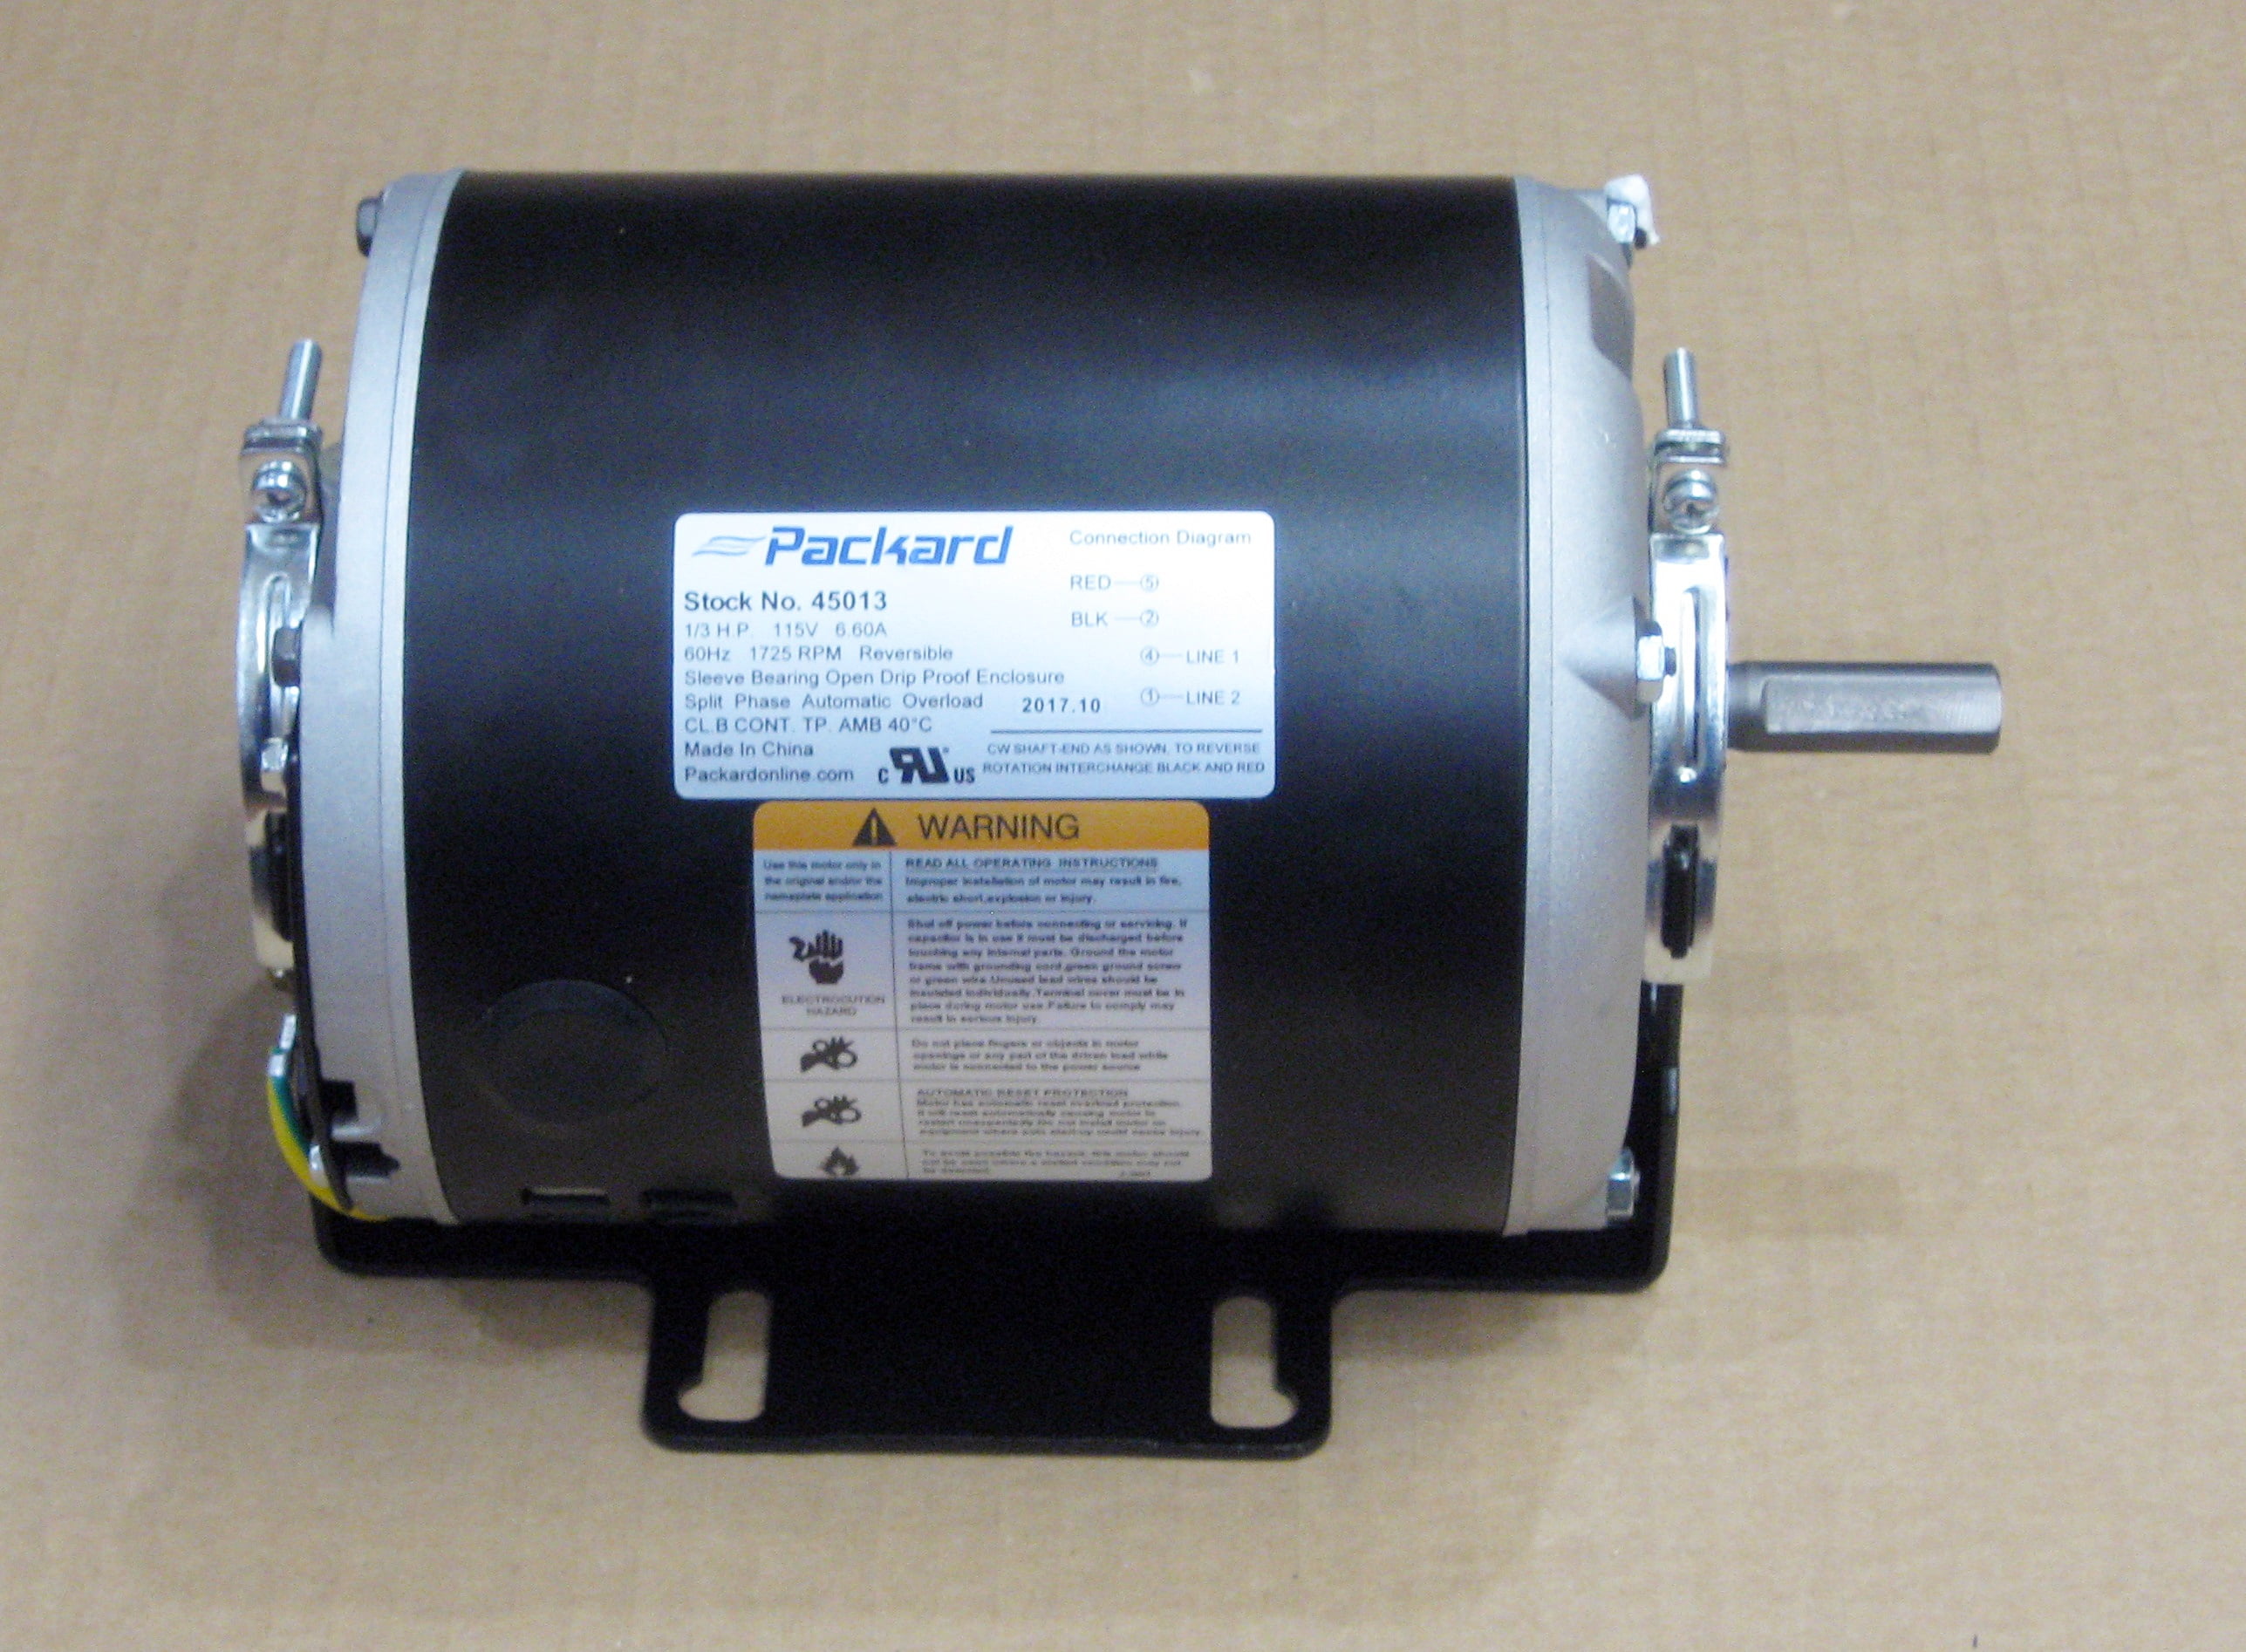 Details about   RELIANCE C56H3002H LJ 1725 RPM FB56C FR 1/3 HP 1 PH AC MOTOR NOS FREE SHIPPING 